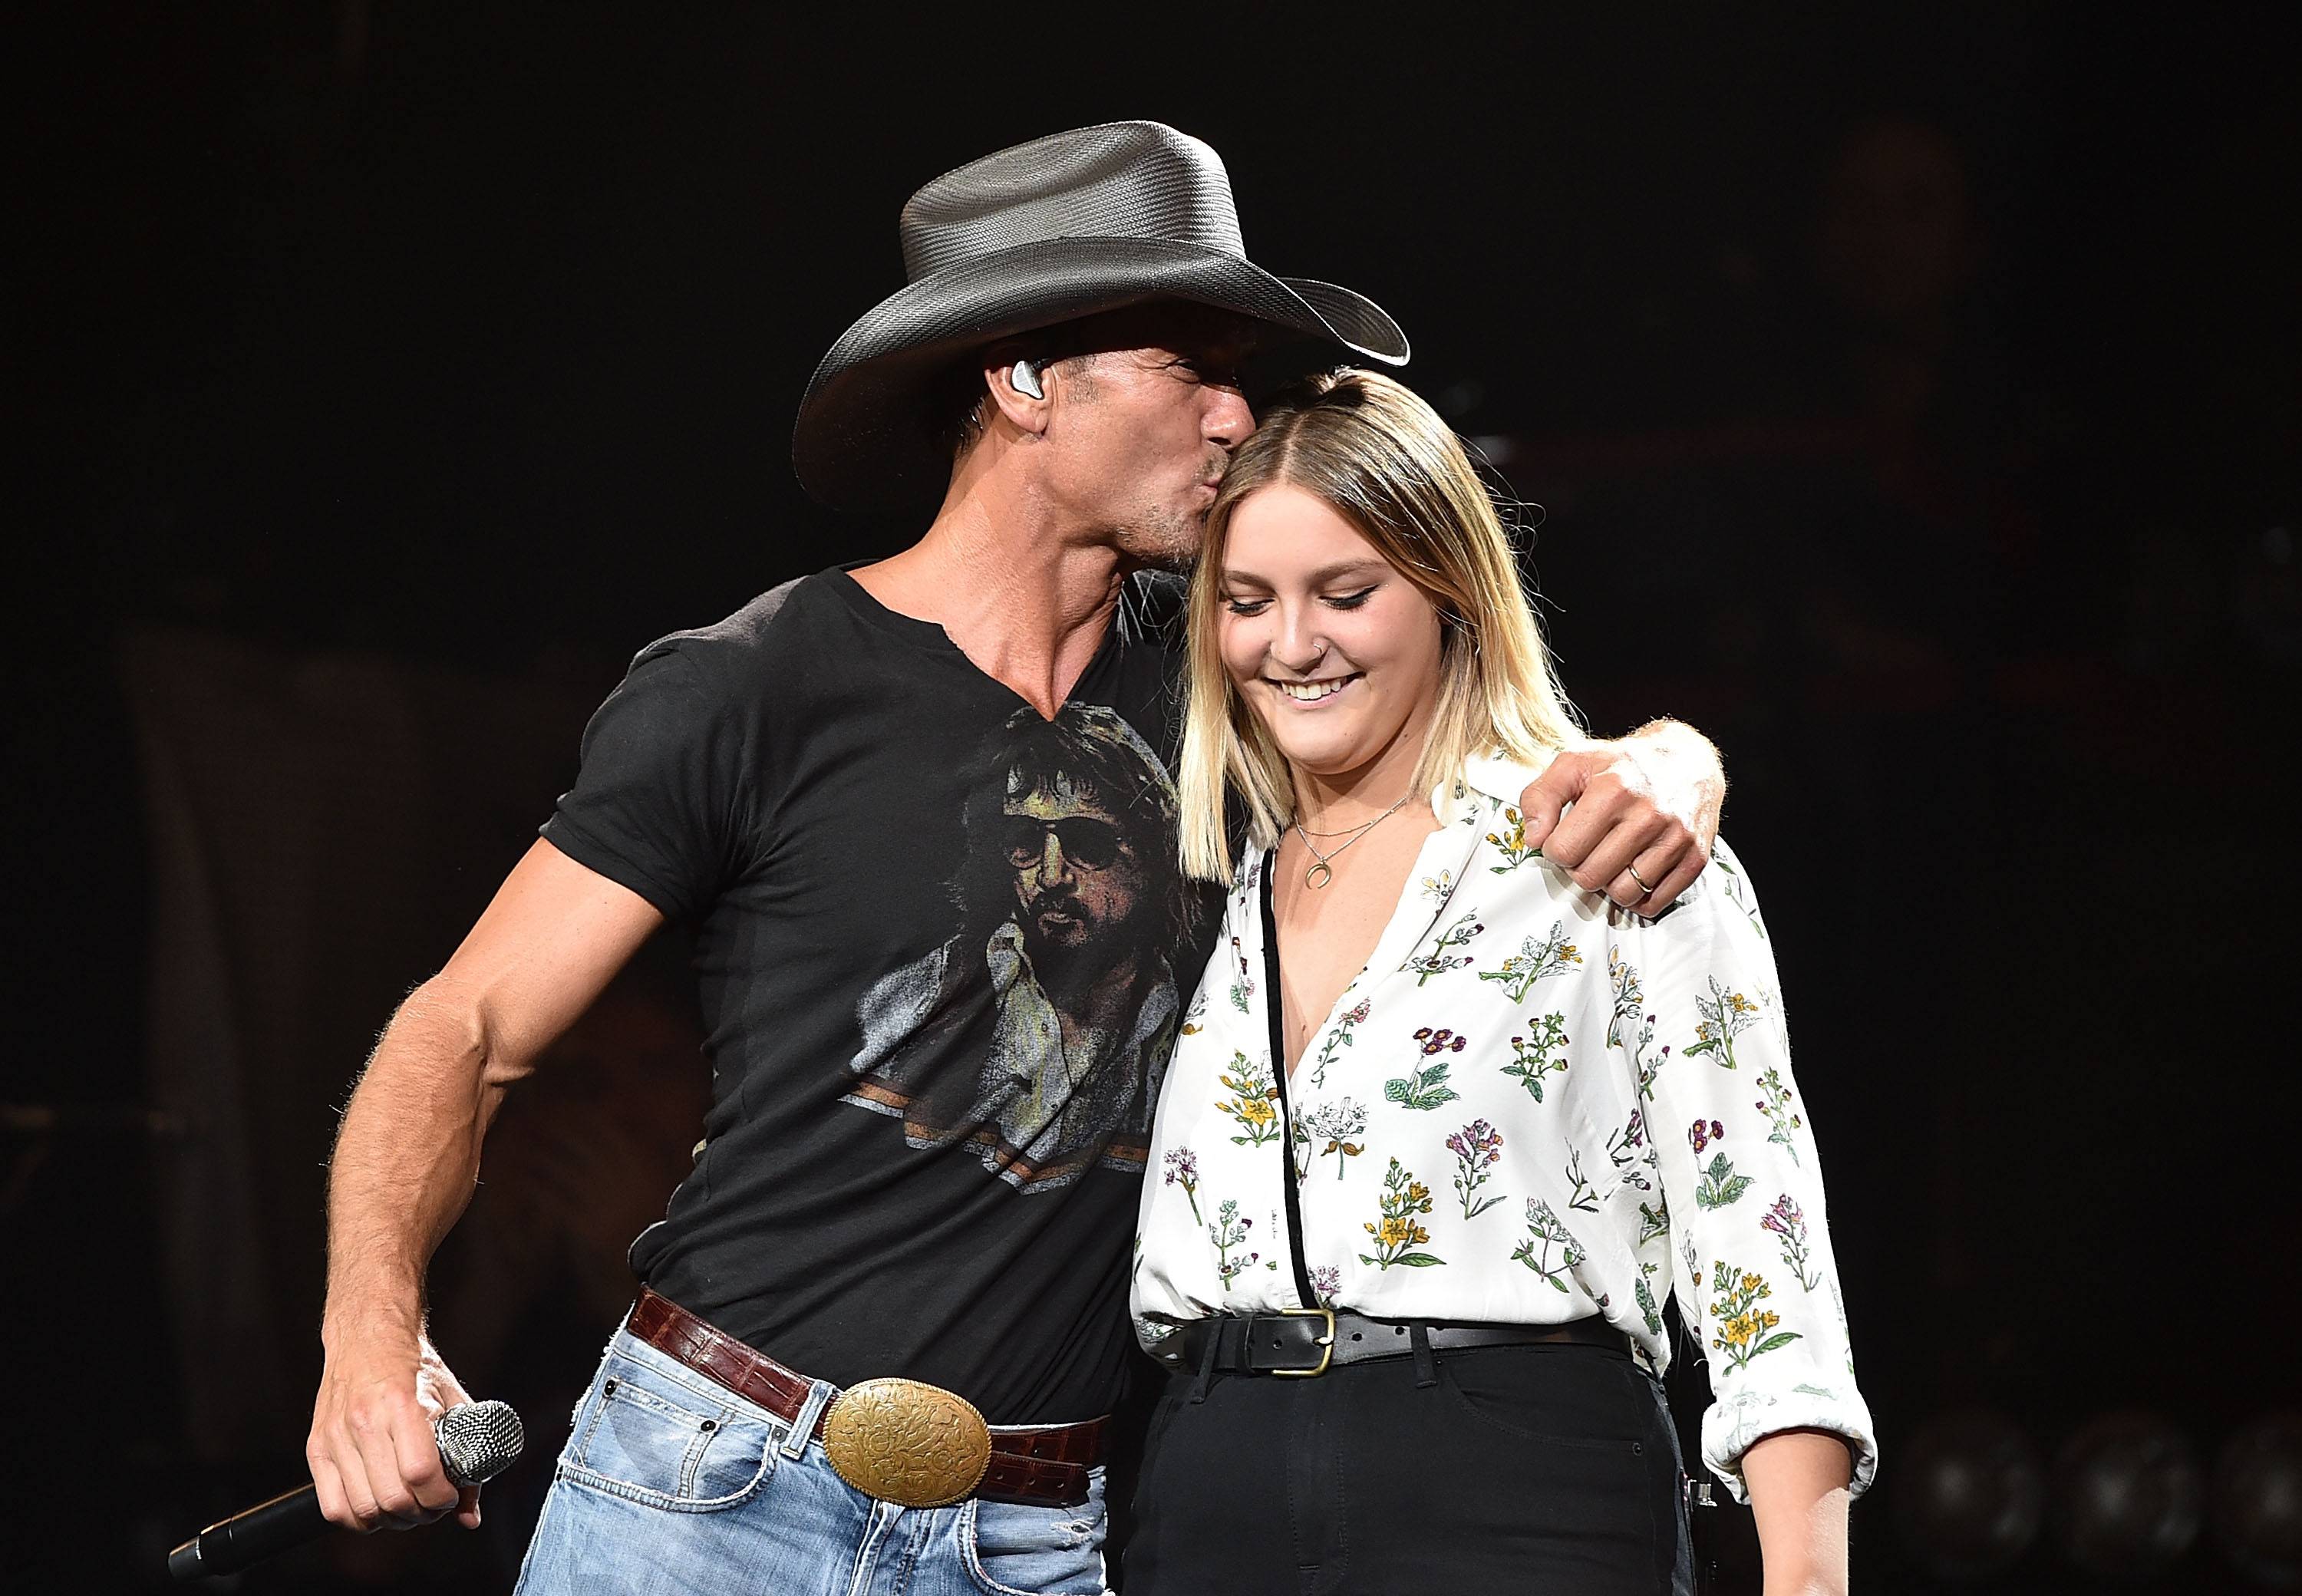 Tim McGraw and Faith Hill's daughter celebrates very famous